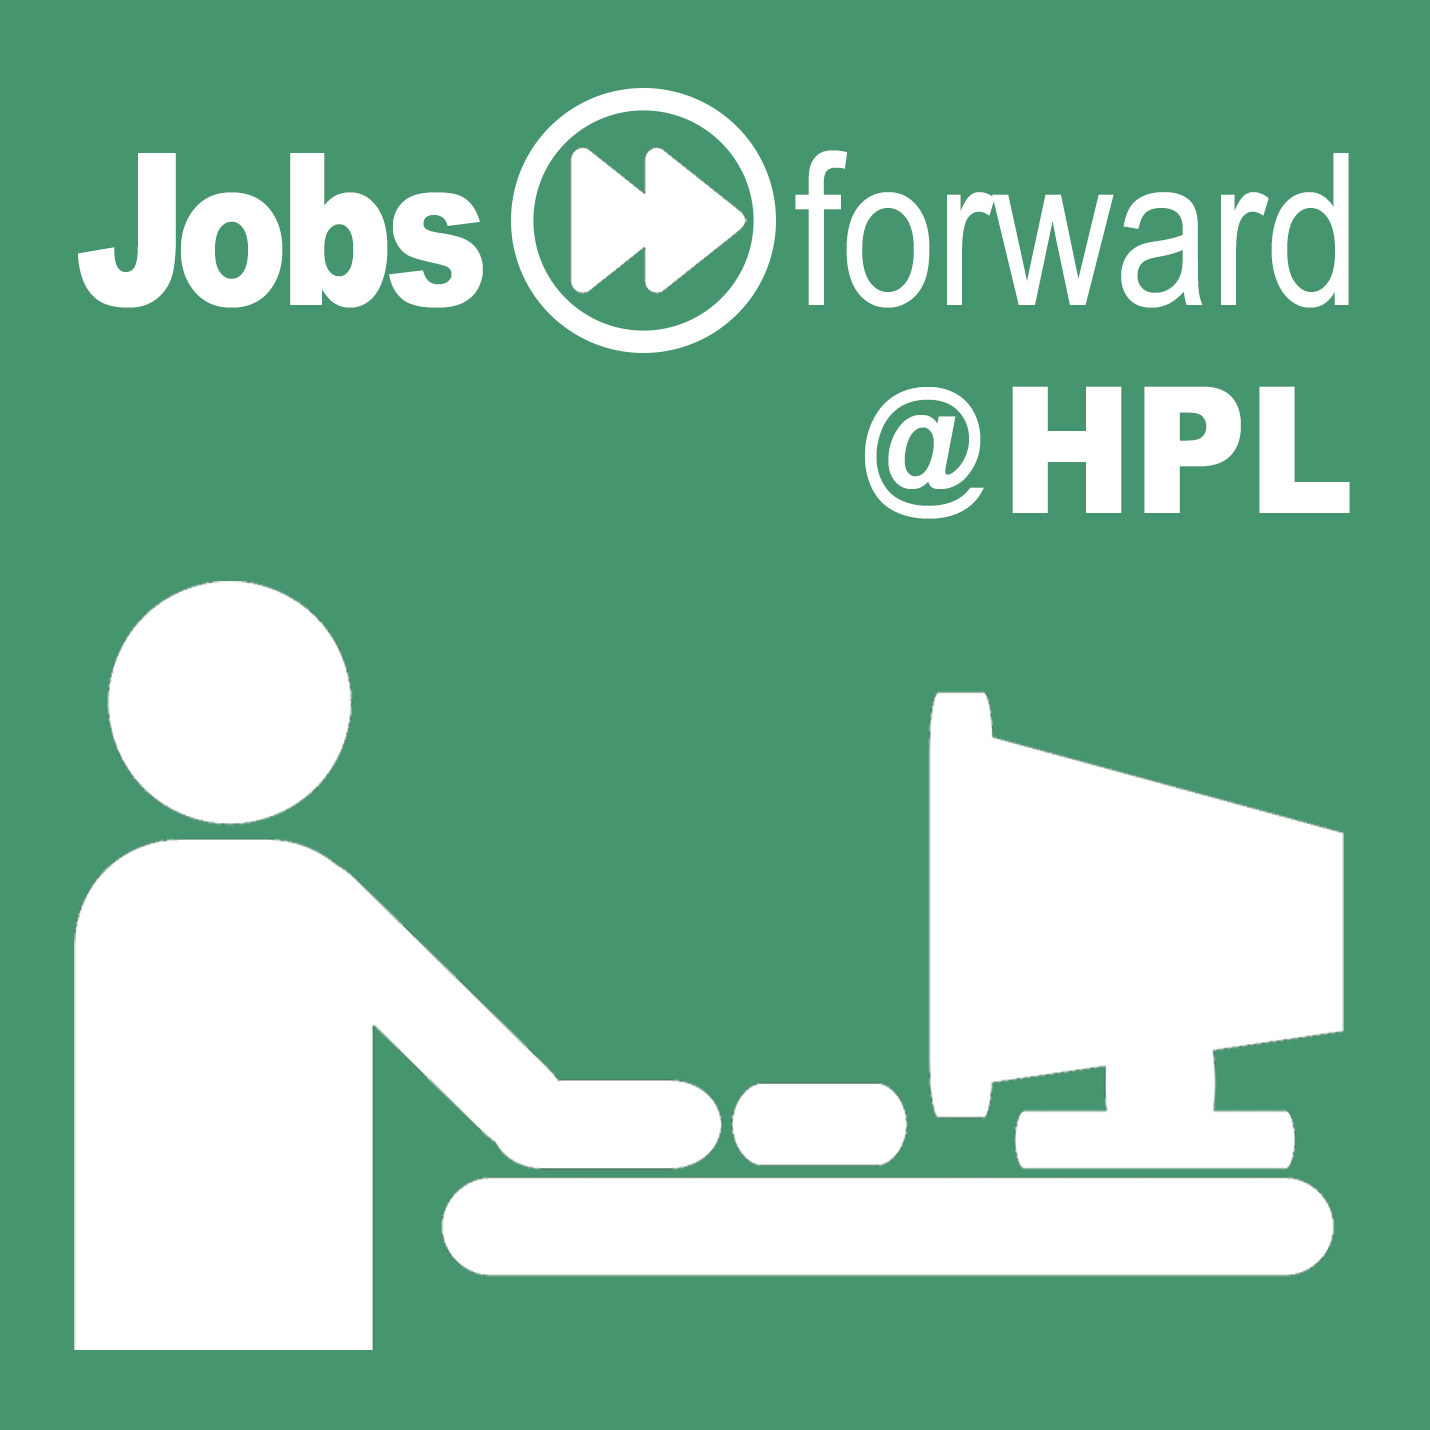 Stylized image of a person at a desk with a computer and the words "Jobs Forward @ HPL" and the fast-forward symbol.